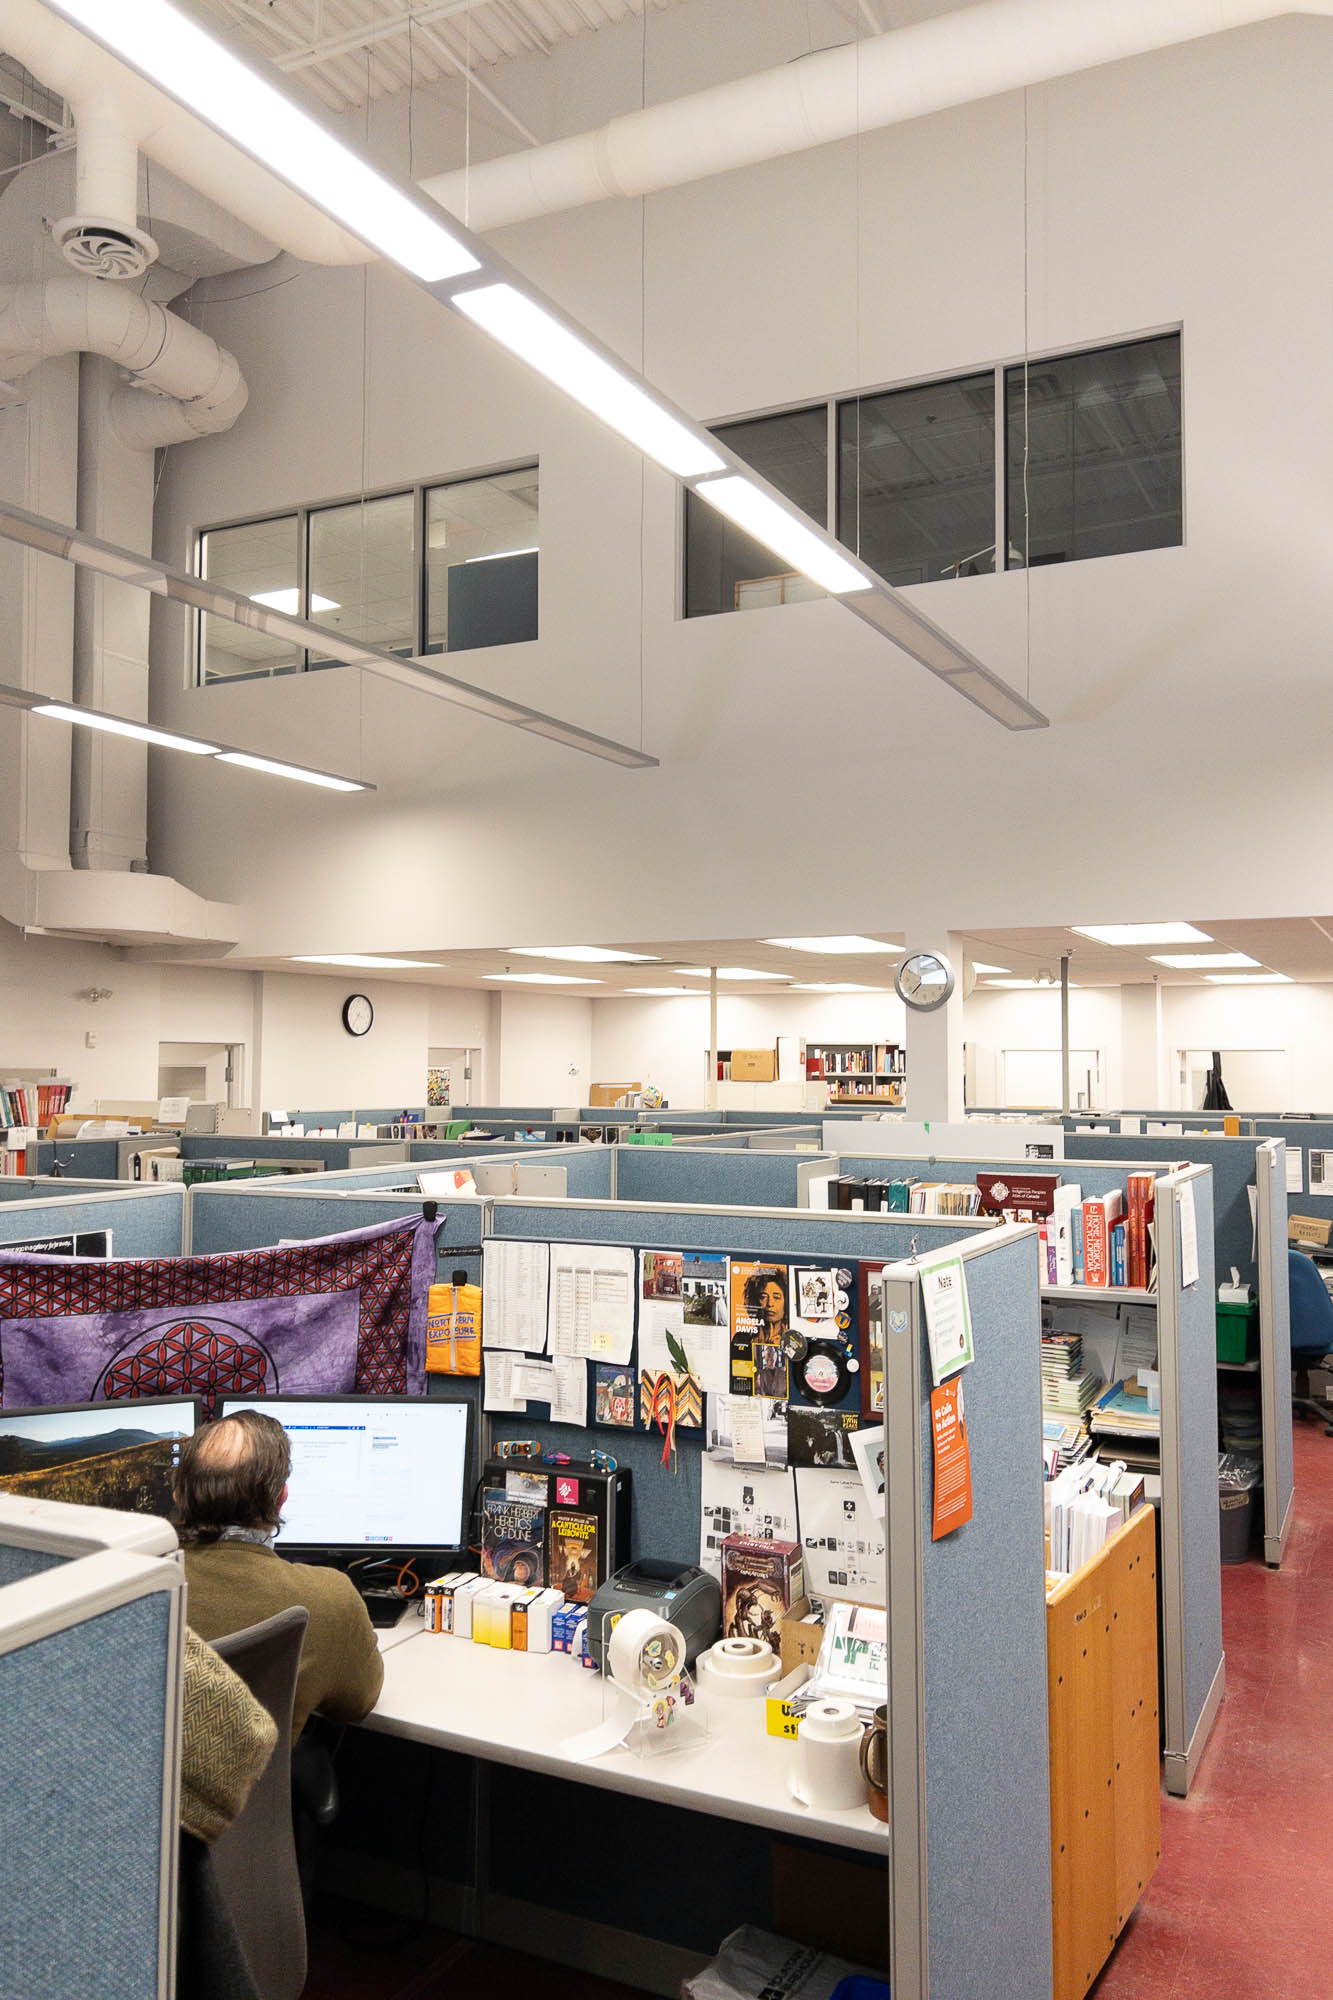 Interior of a library backoffice area. Rectangular windows are seen above a series of cubicles, hinting at their former use as projection booth.